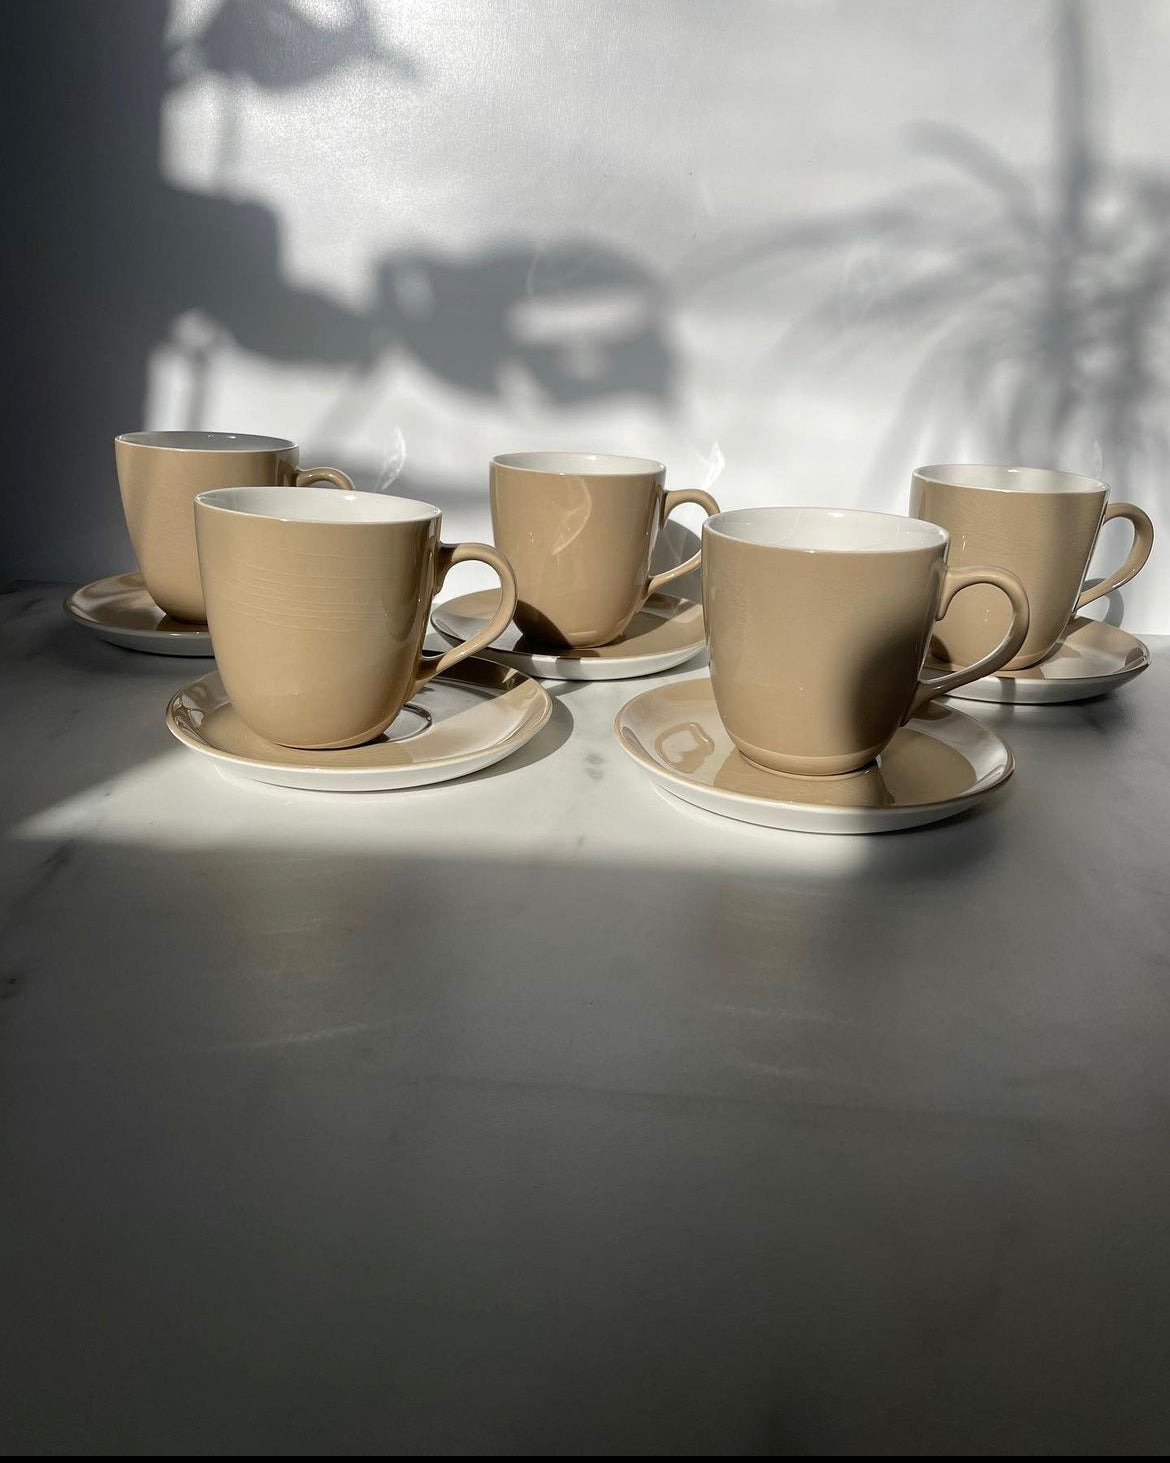 Cups- Cappuccino Cup and Saucer - Set of 2